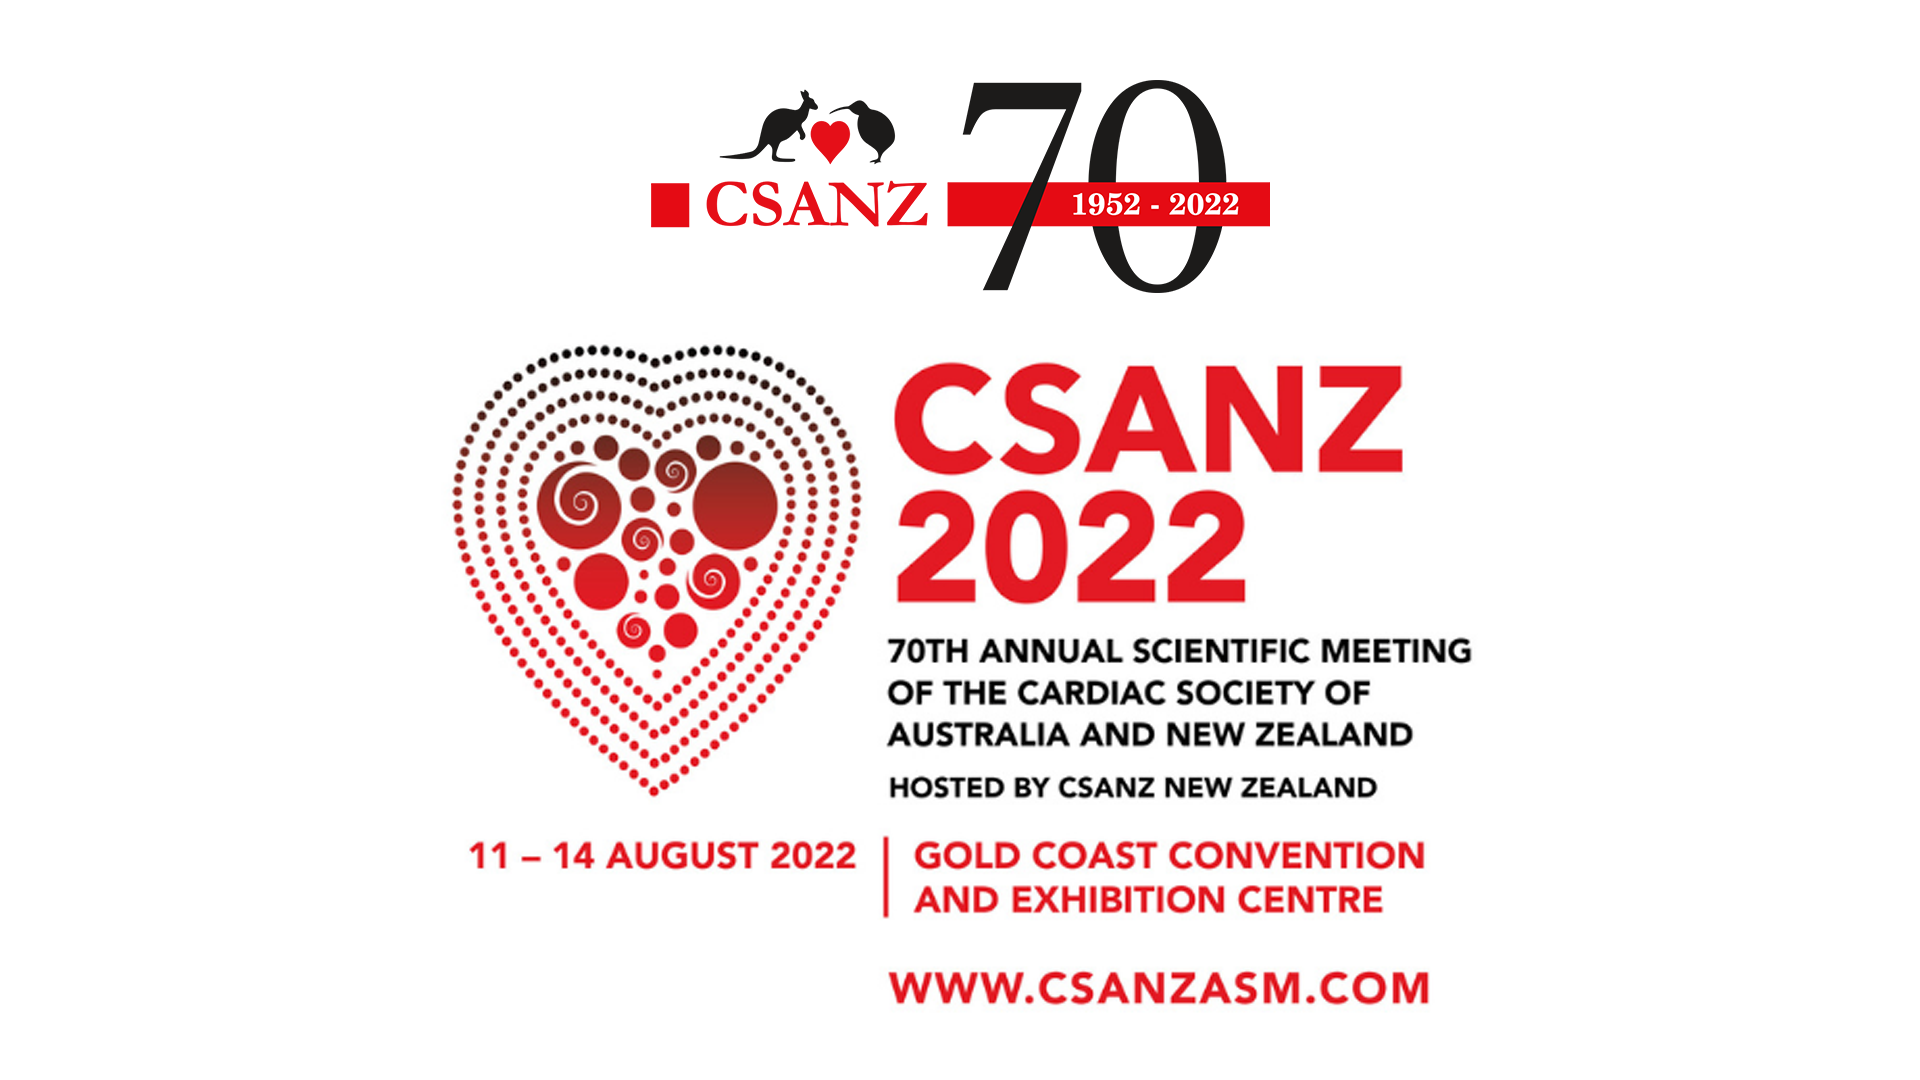 70th Annual Scientific Meeting of the Cardiac Society of Australia and New Zealand